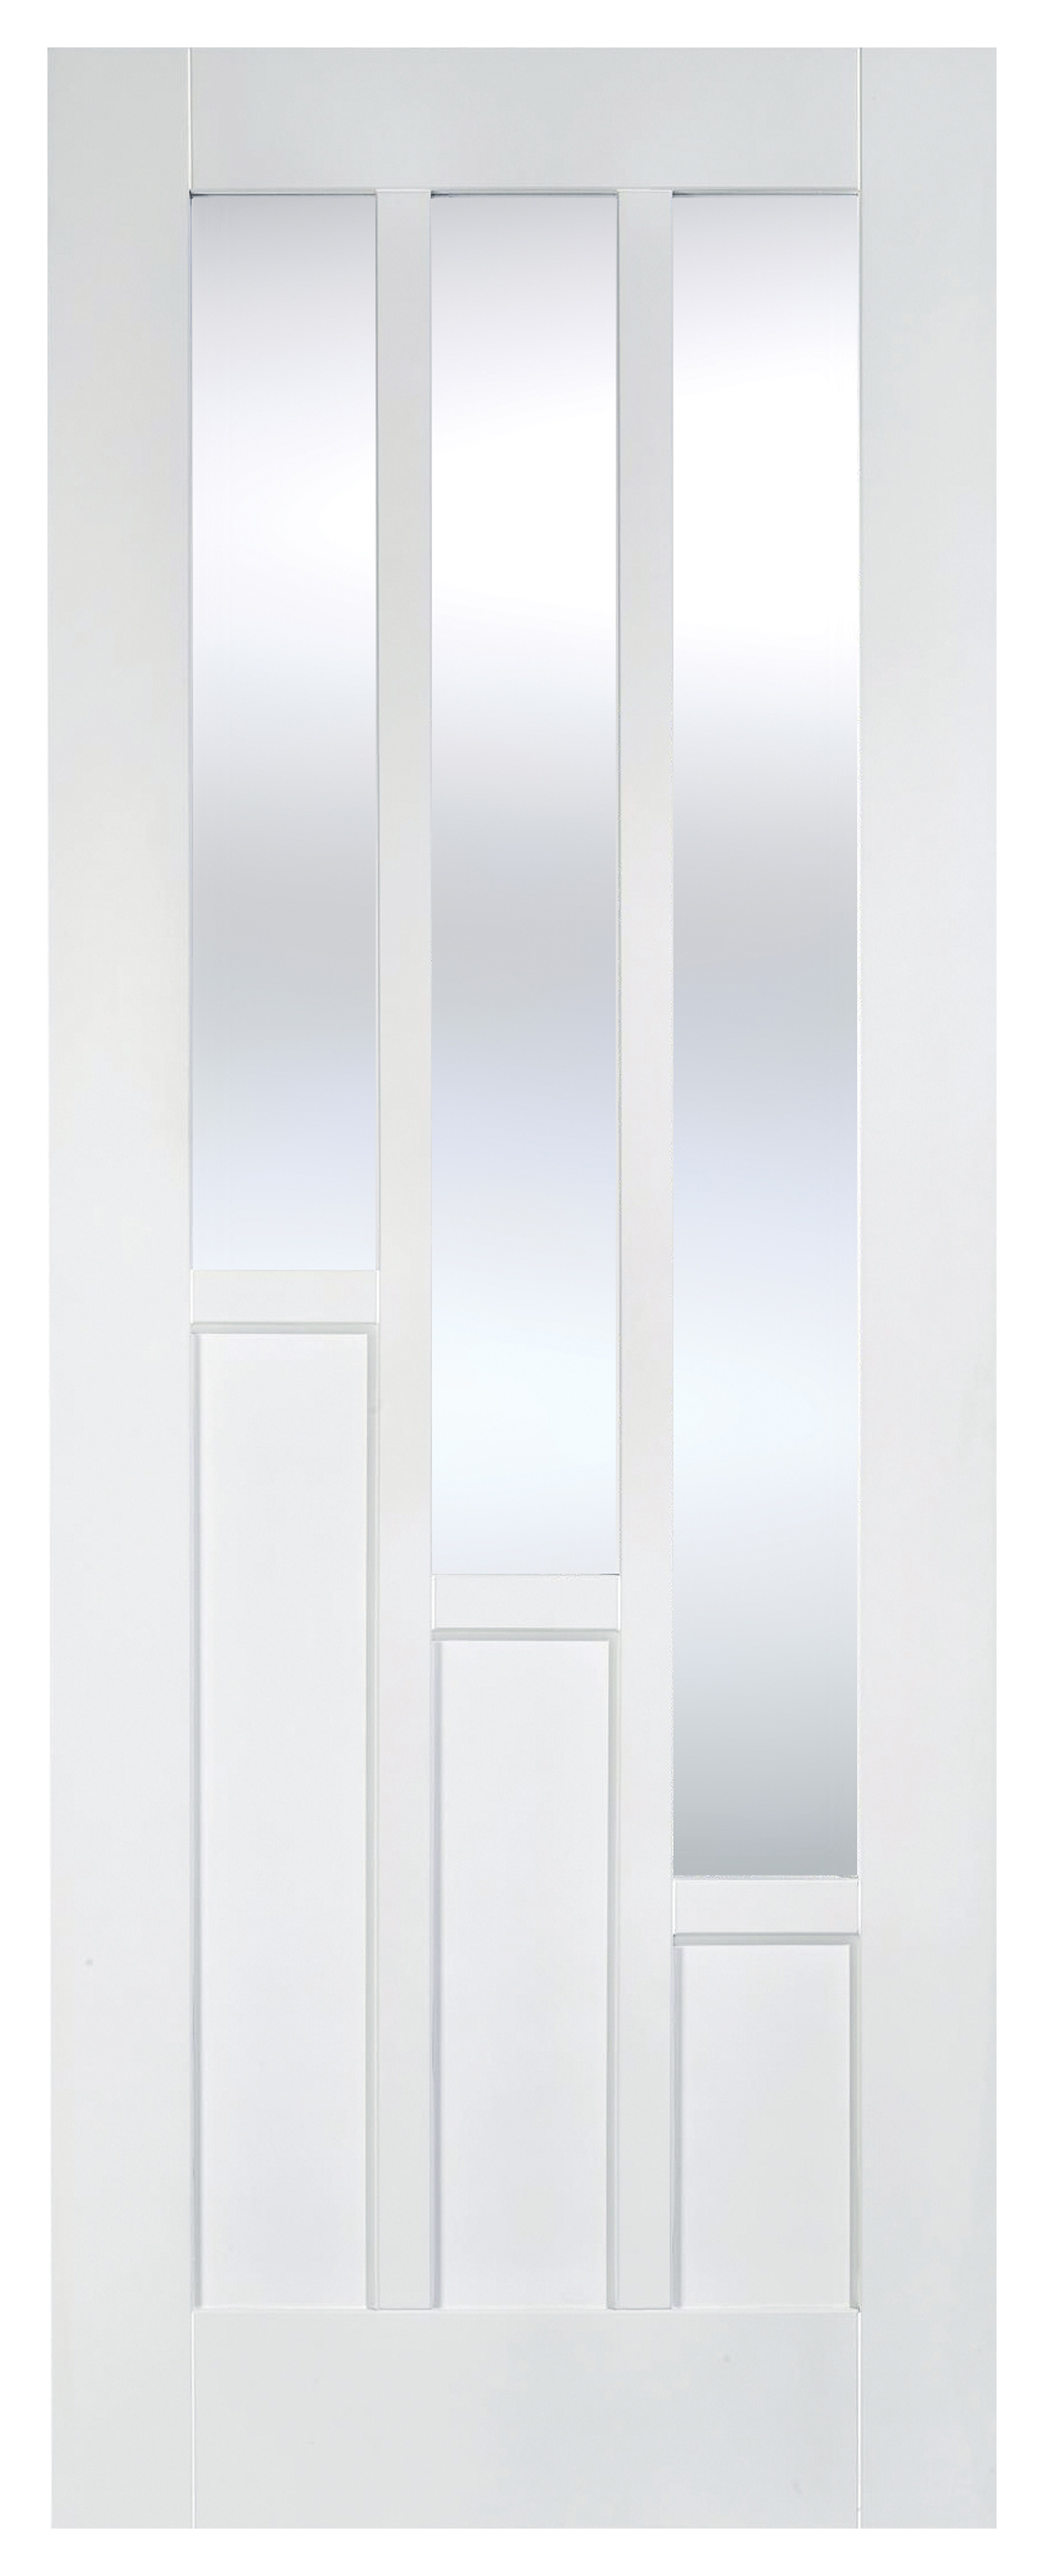 Image of LPD Internal Coventry 3 Lite Primed White Solid Core Door - 610 x 1981mm